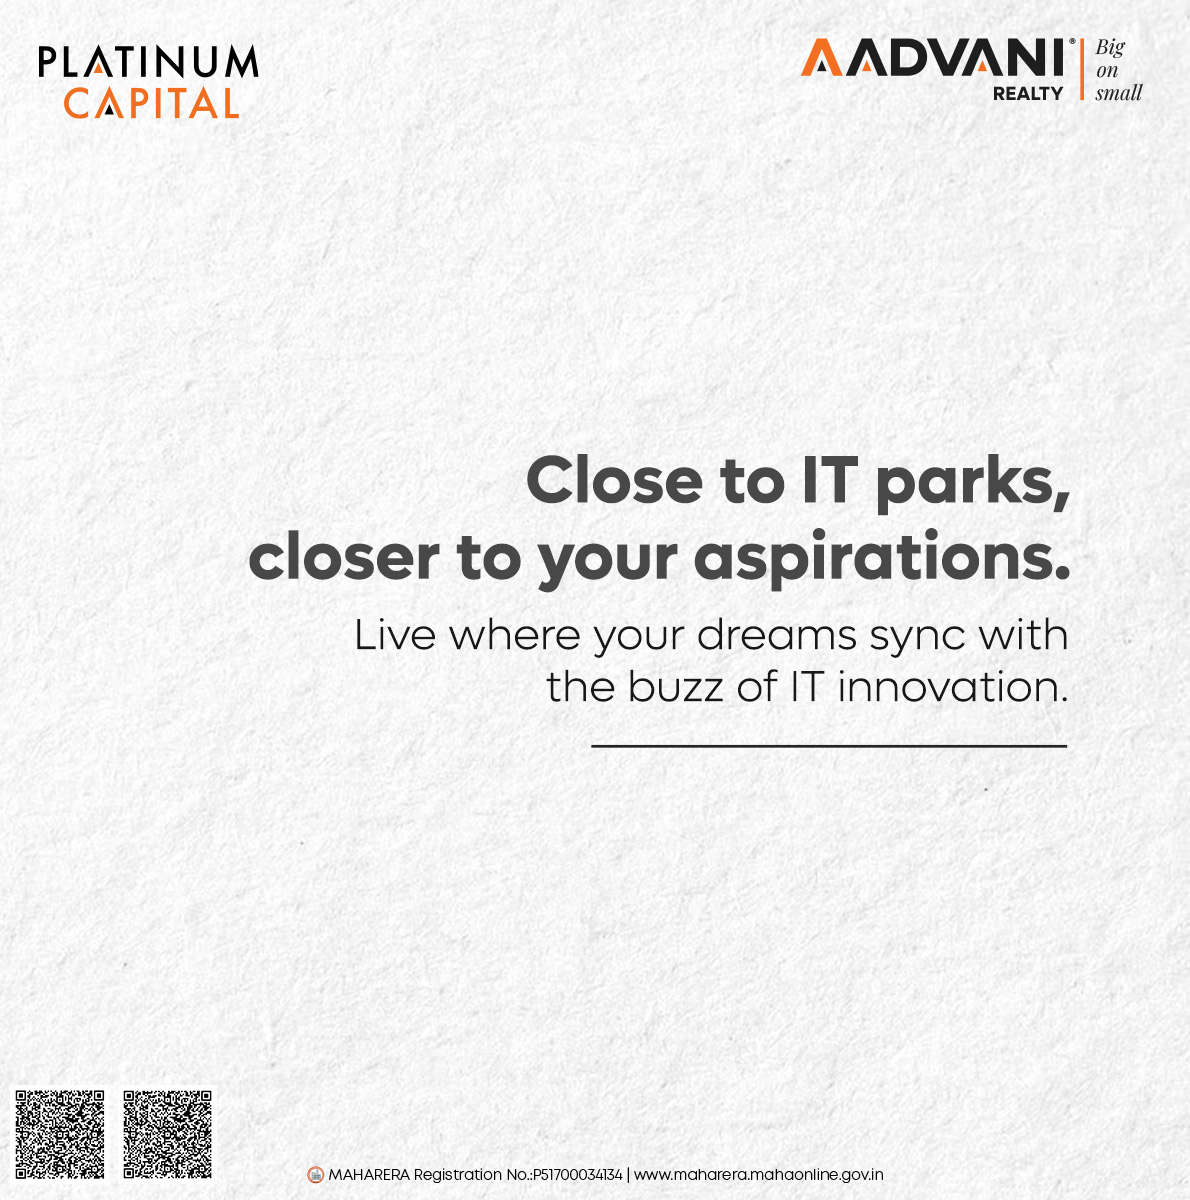 Embark on a journey of innovation in the heart of Platinum Capital's cutting-edge IT park. Your future awaits in a community where your aspirations find their perfect rhythm.

#AAdvaniRealty #PlatinumCapital #InnovationHub  #ITParkVibes  #FutureReadyLiving #RealEstate #Koregaon